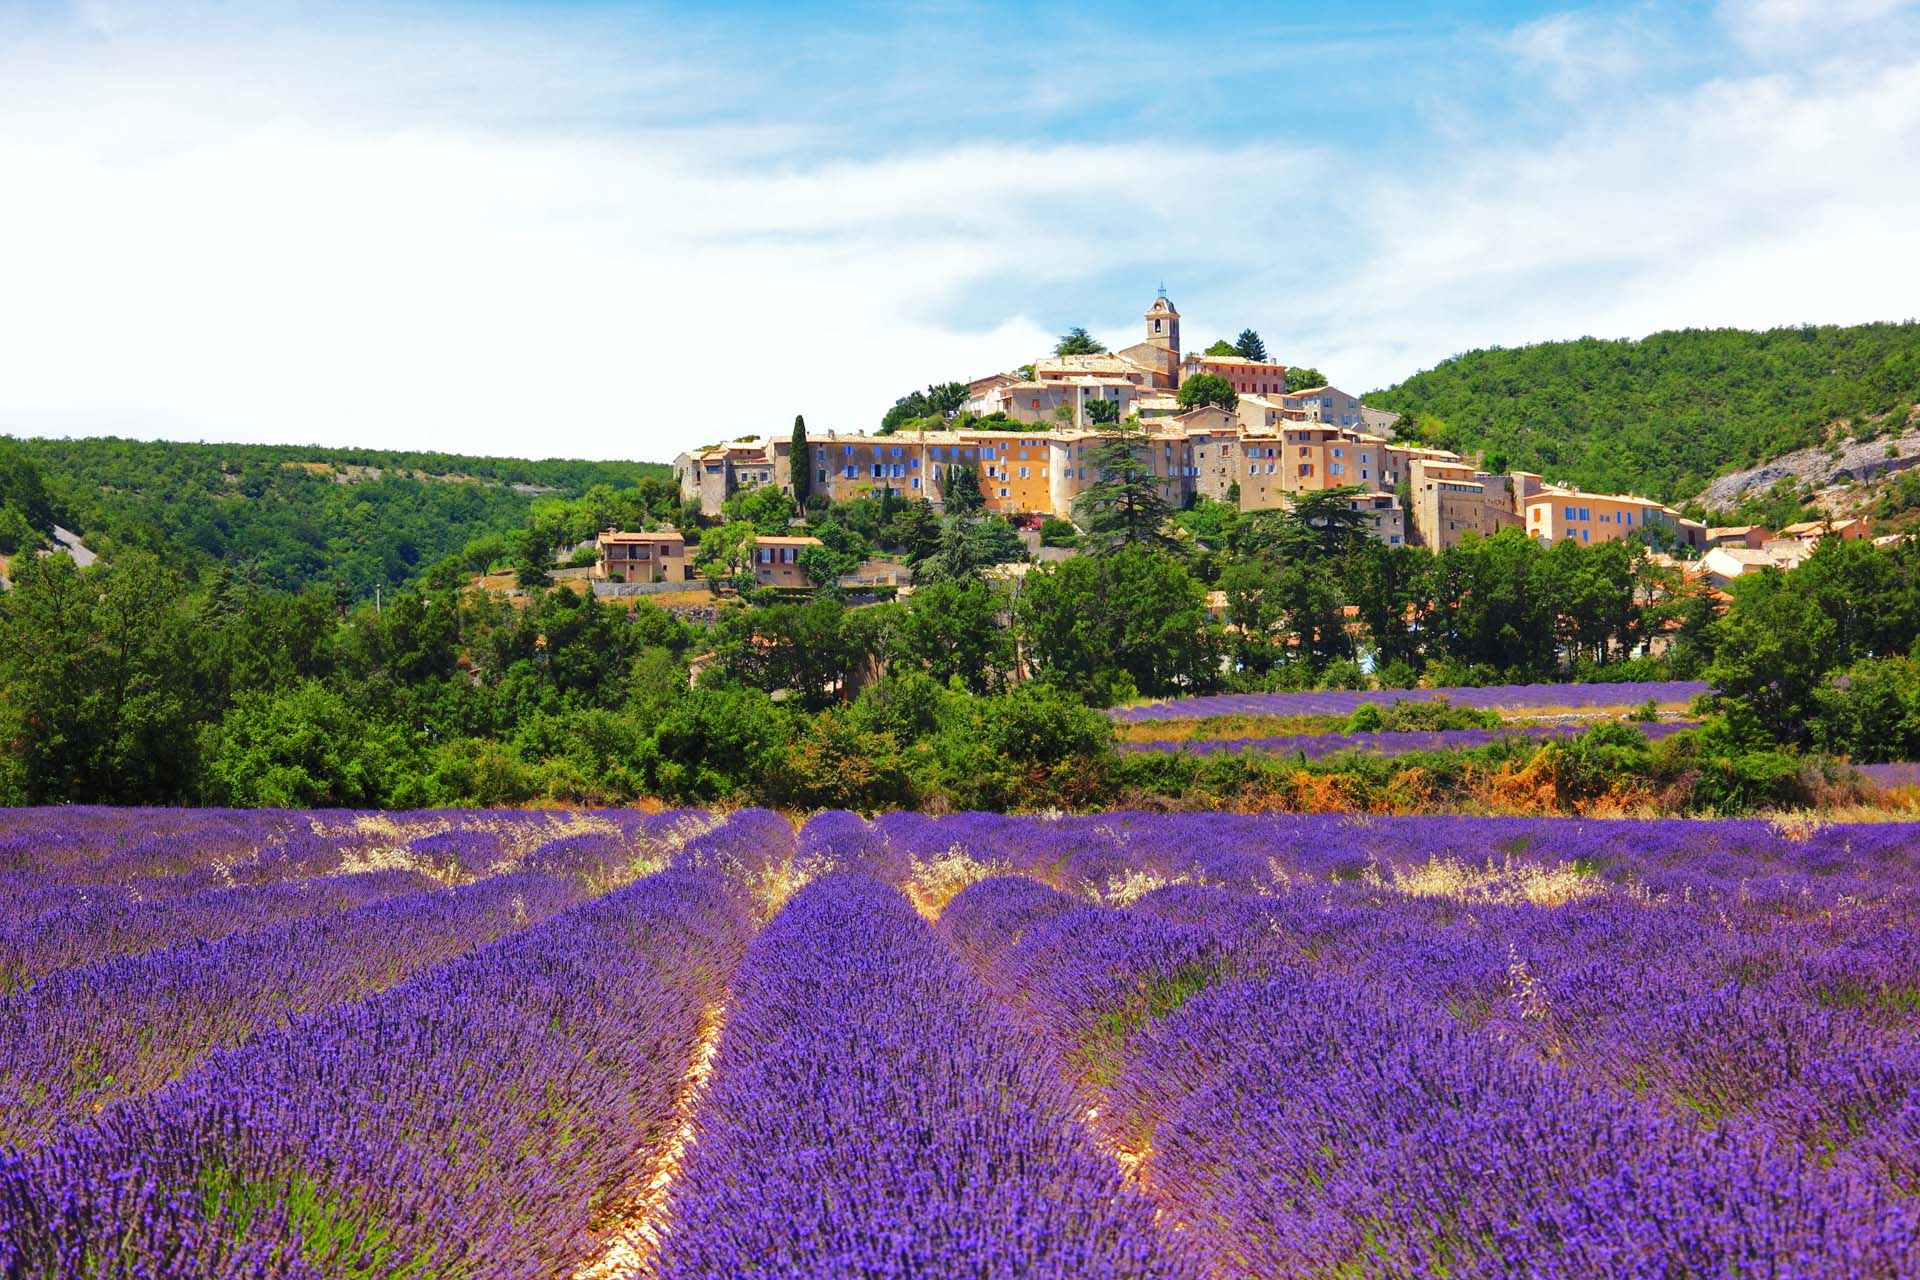 When to to Plant ‘Provence’ Lavender